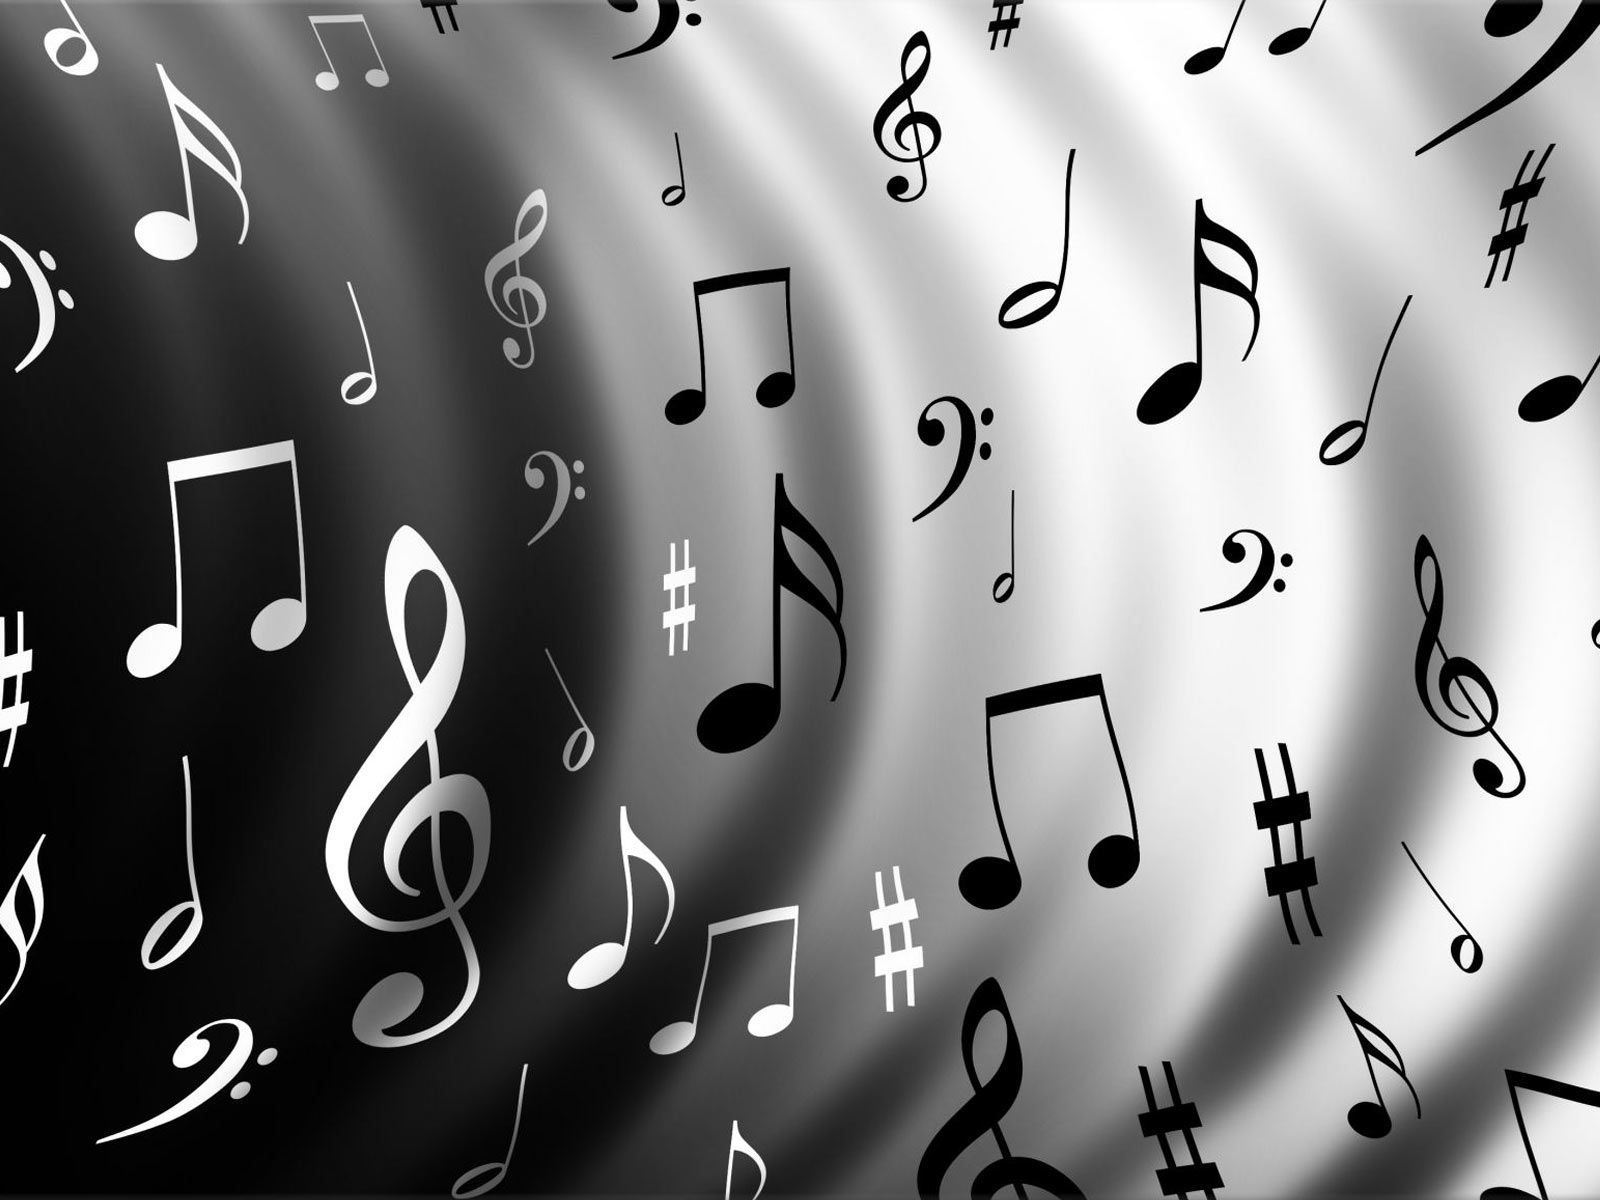 Download Black And White Music Notes Wallpaper Free By udhao.net